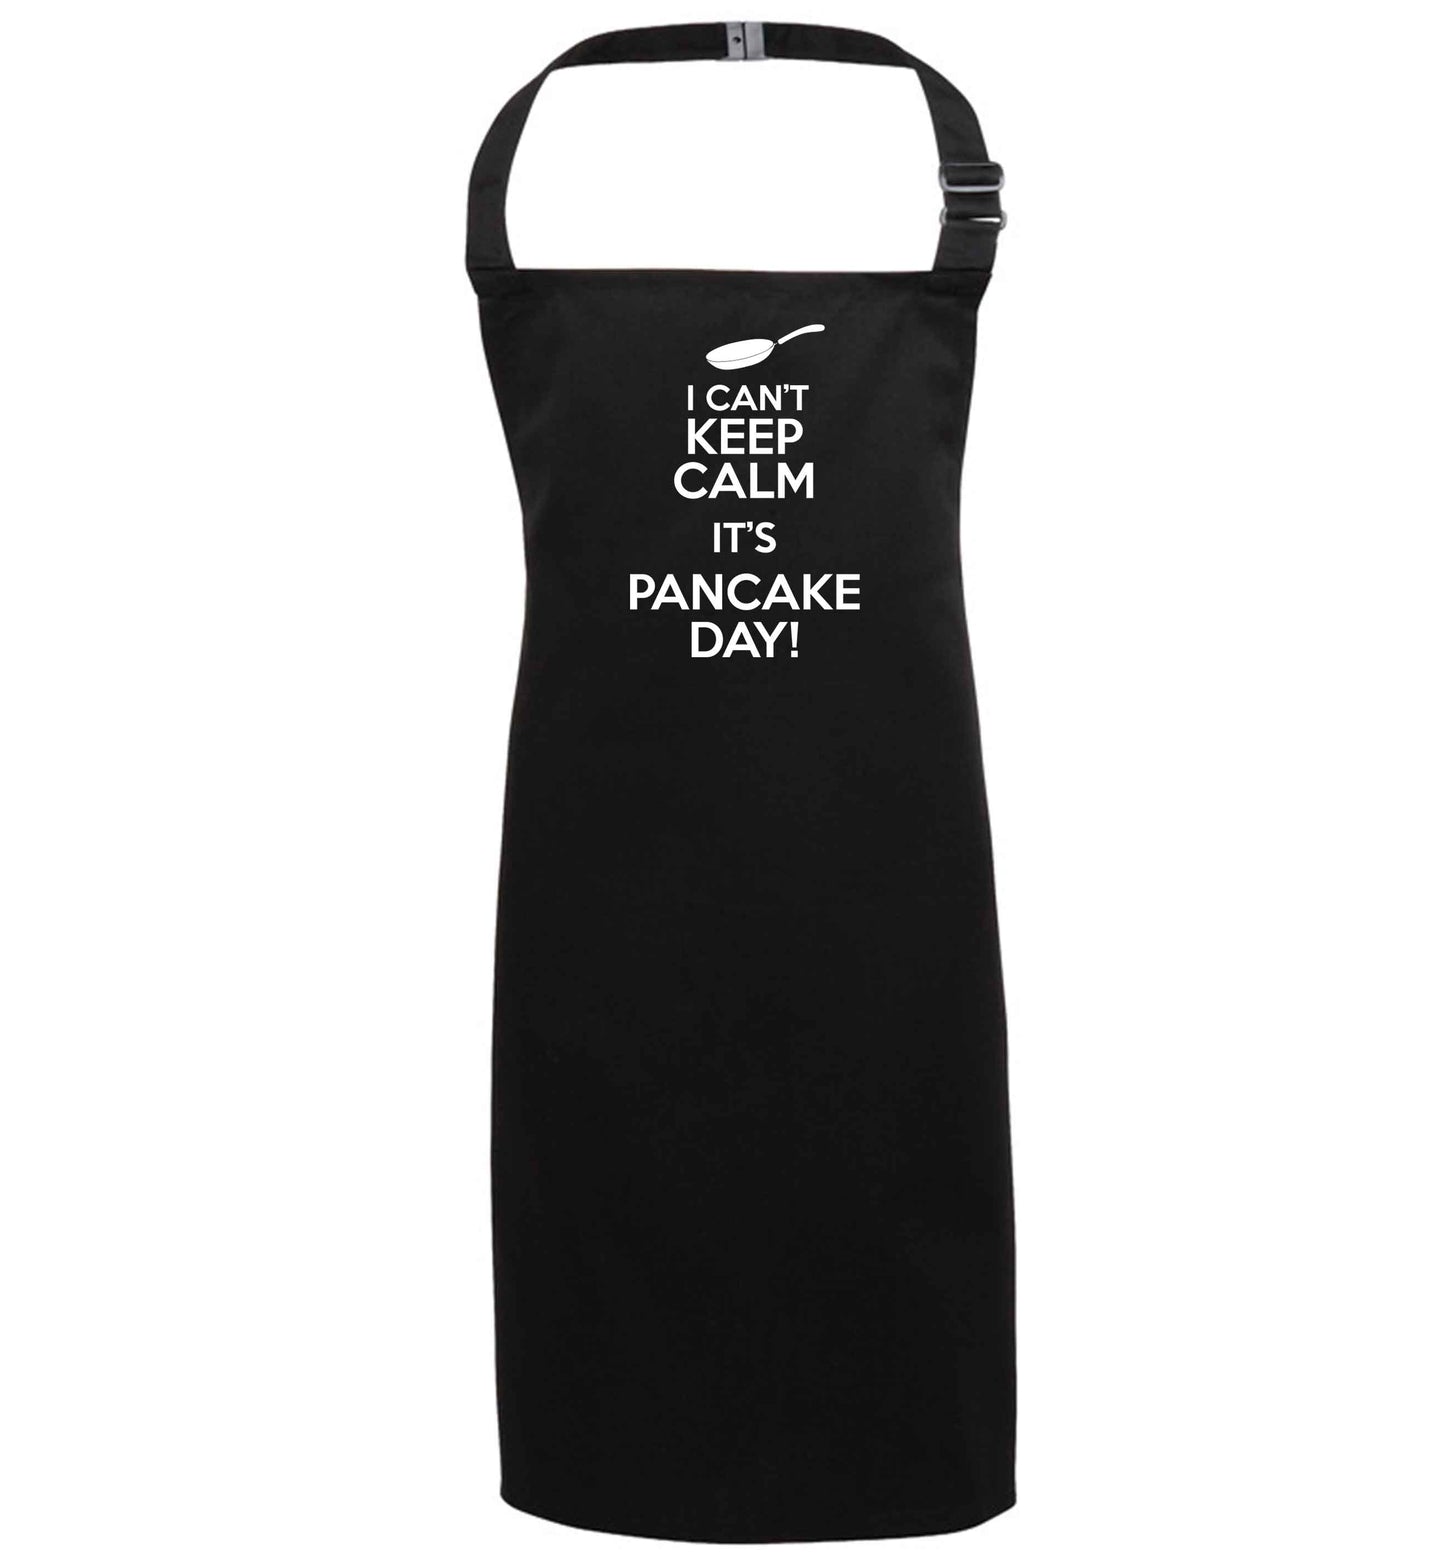 I can't keep calm it's pancake day! black apron 7-10 years